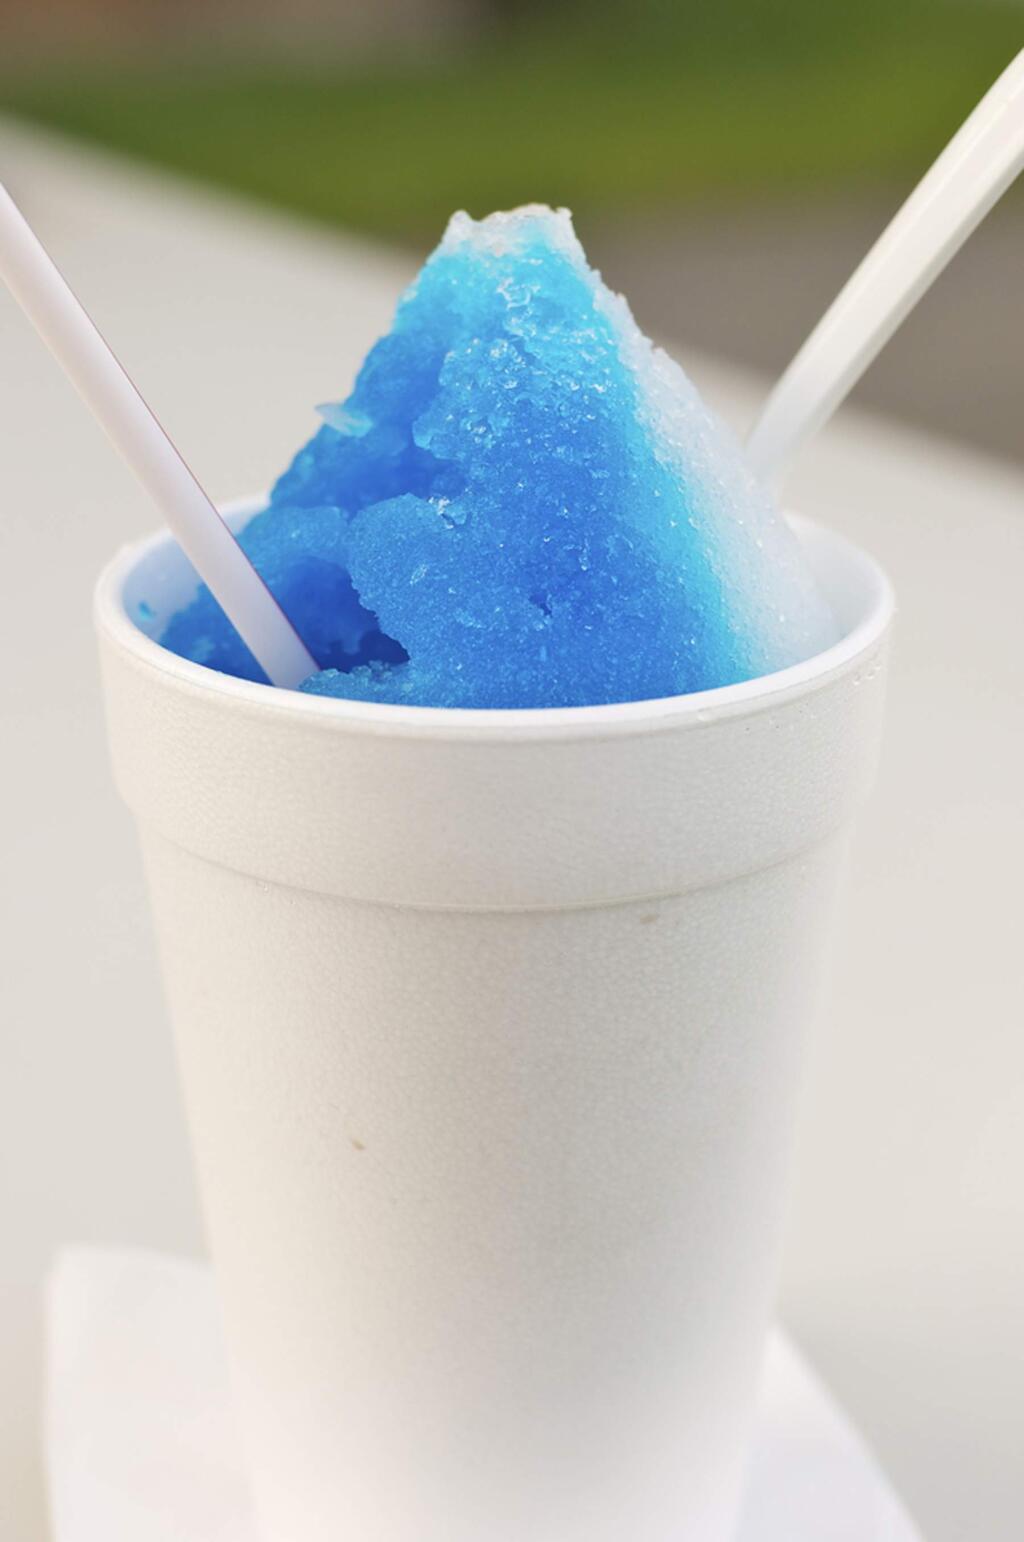 Shave ice is made by shaving a block of ice. It can resemble a snow cone, butr snow cones are made with crushed, rather than shaved ice.